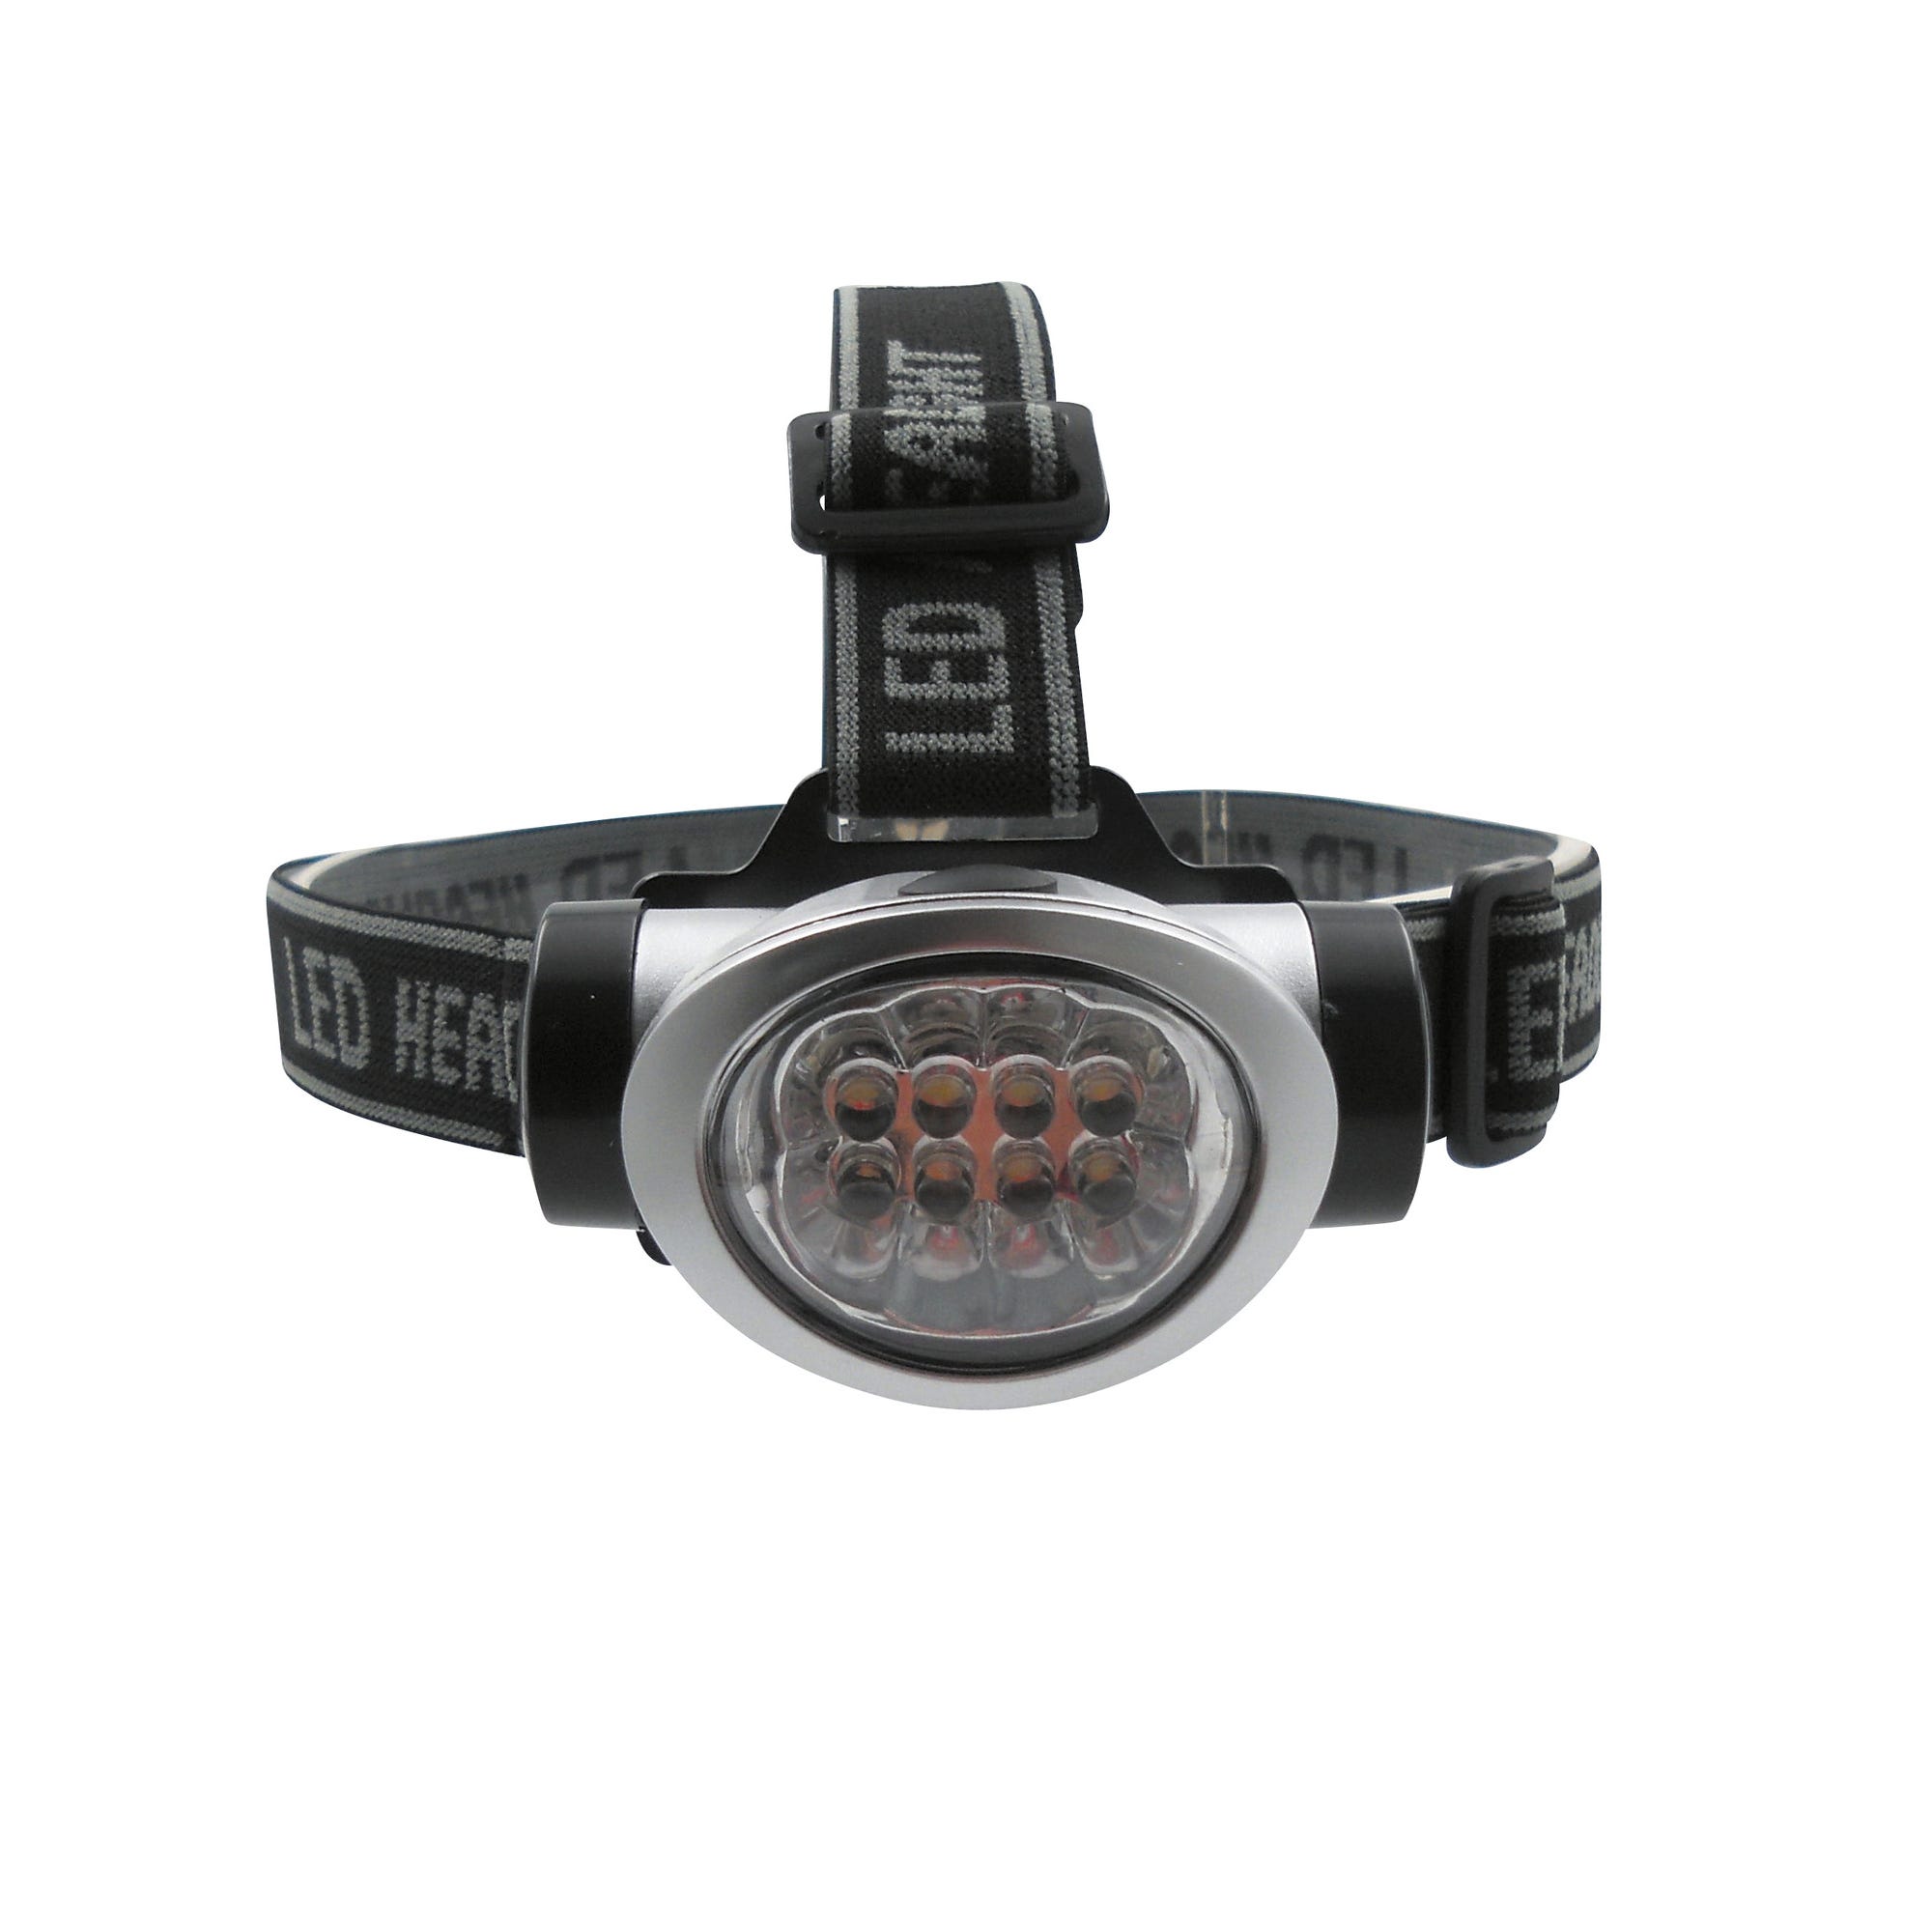 Lampe frontale LED 20 lumens 0